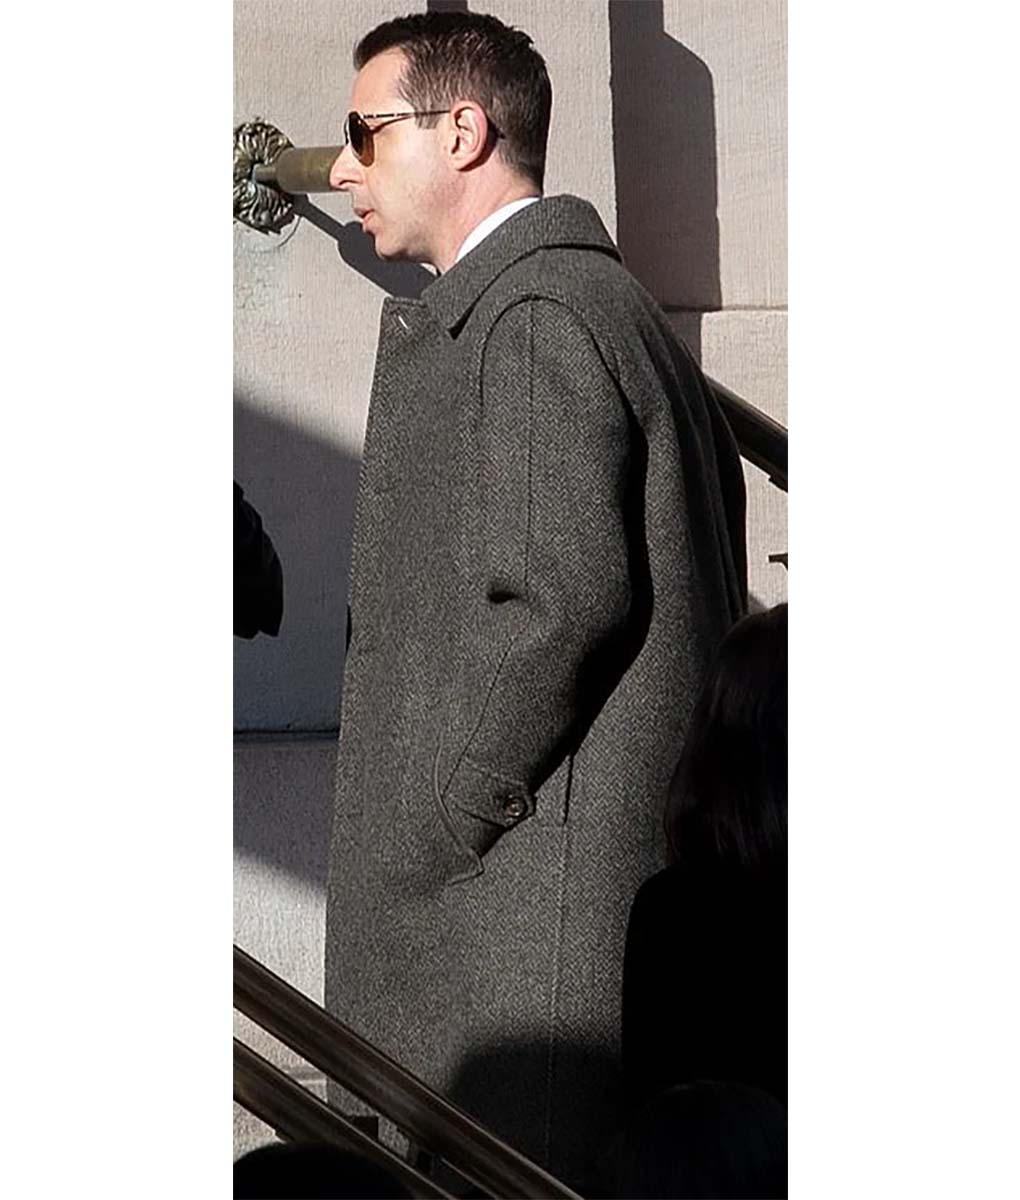 Succession S04 Jeremy Strong Wool Gray Coat